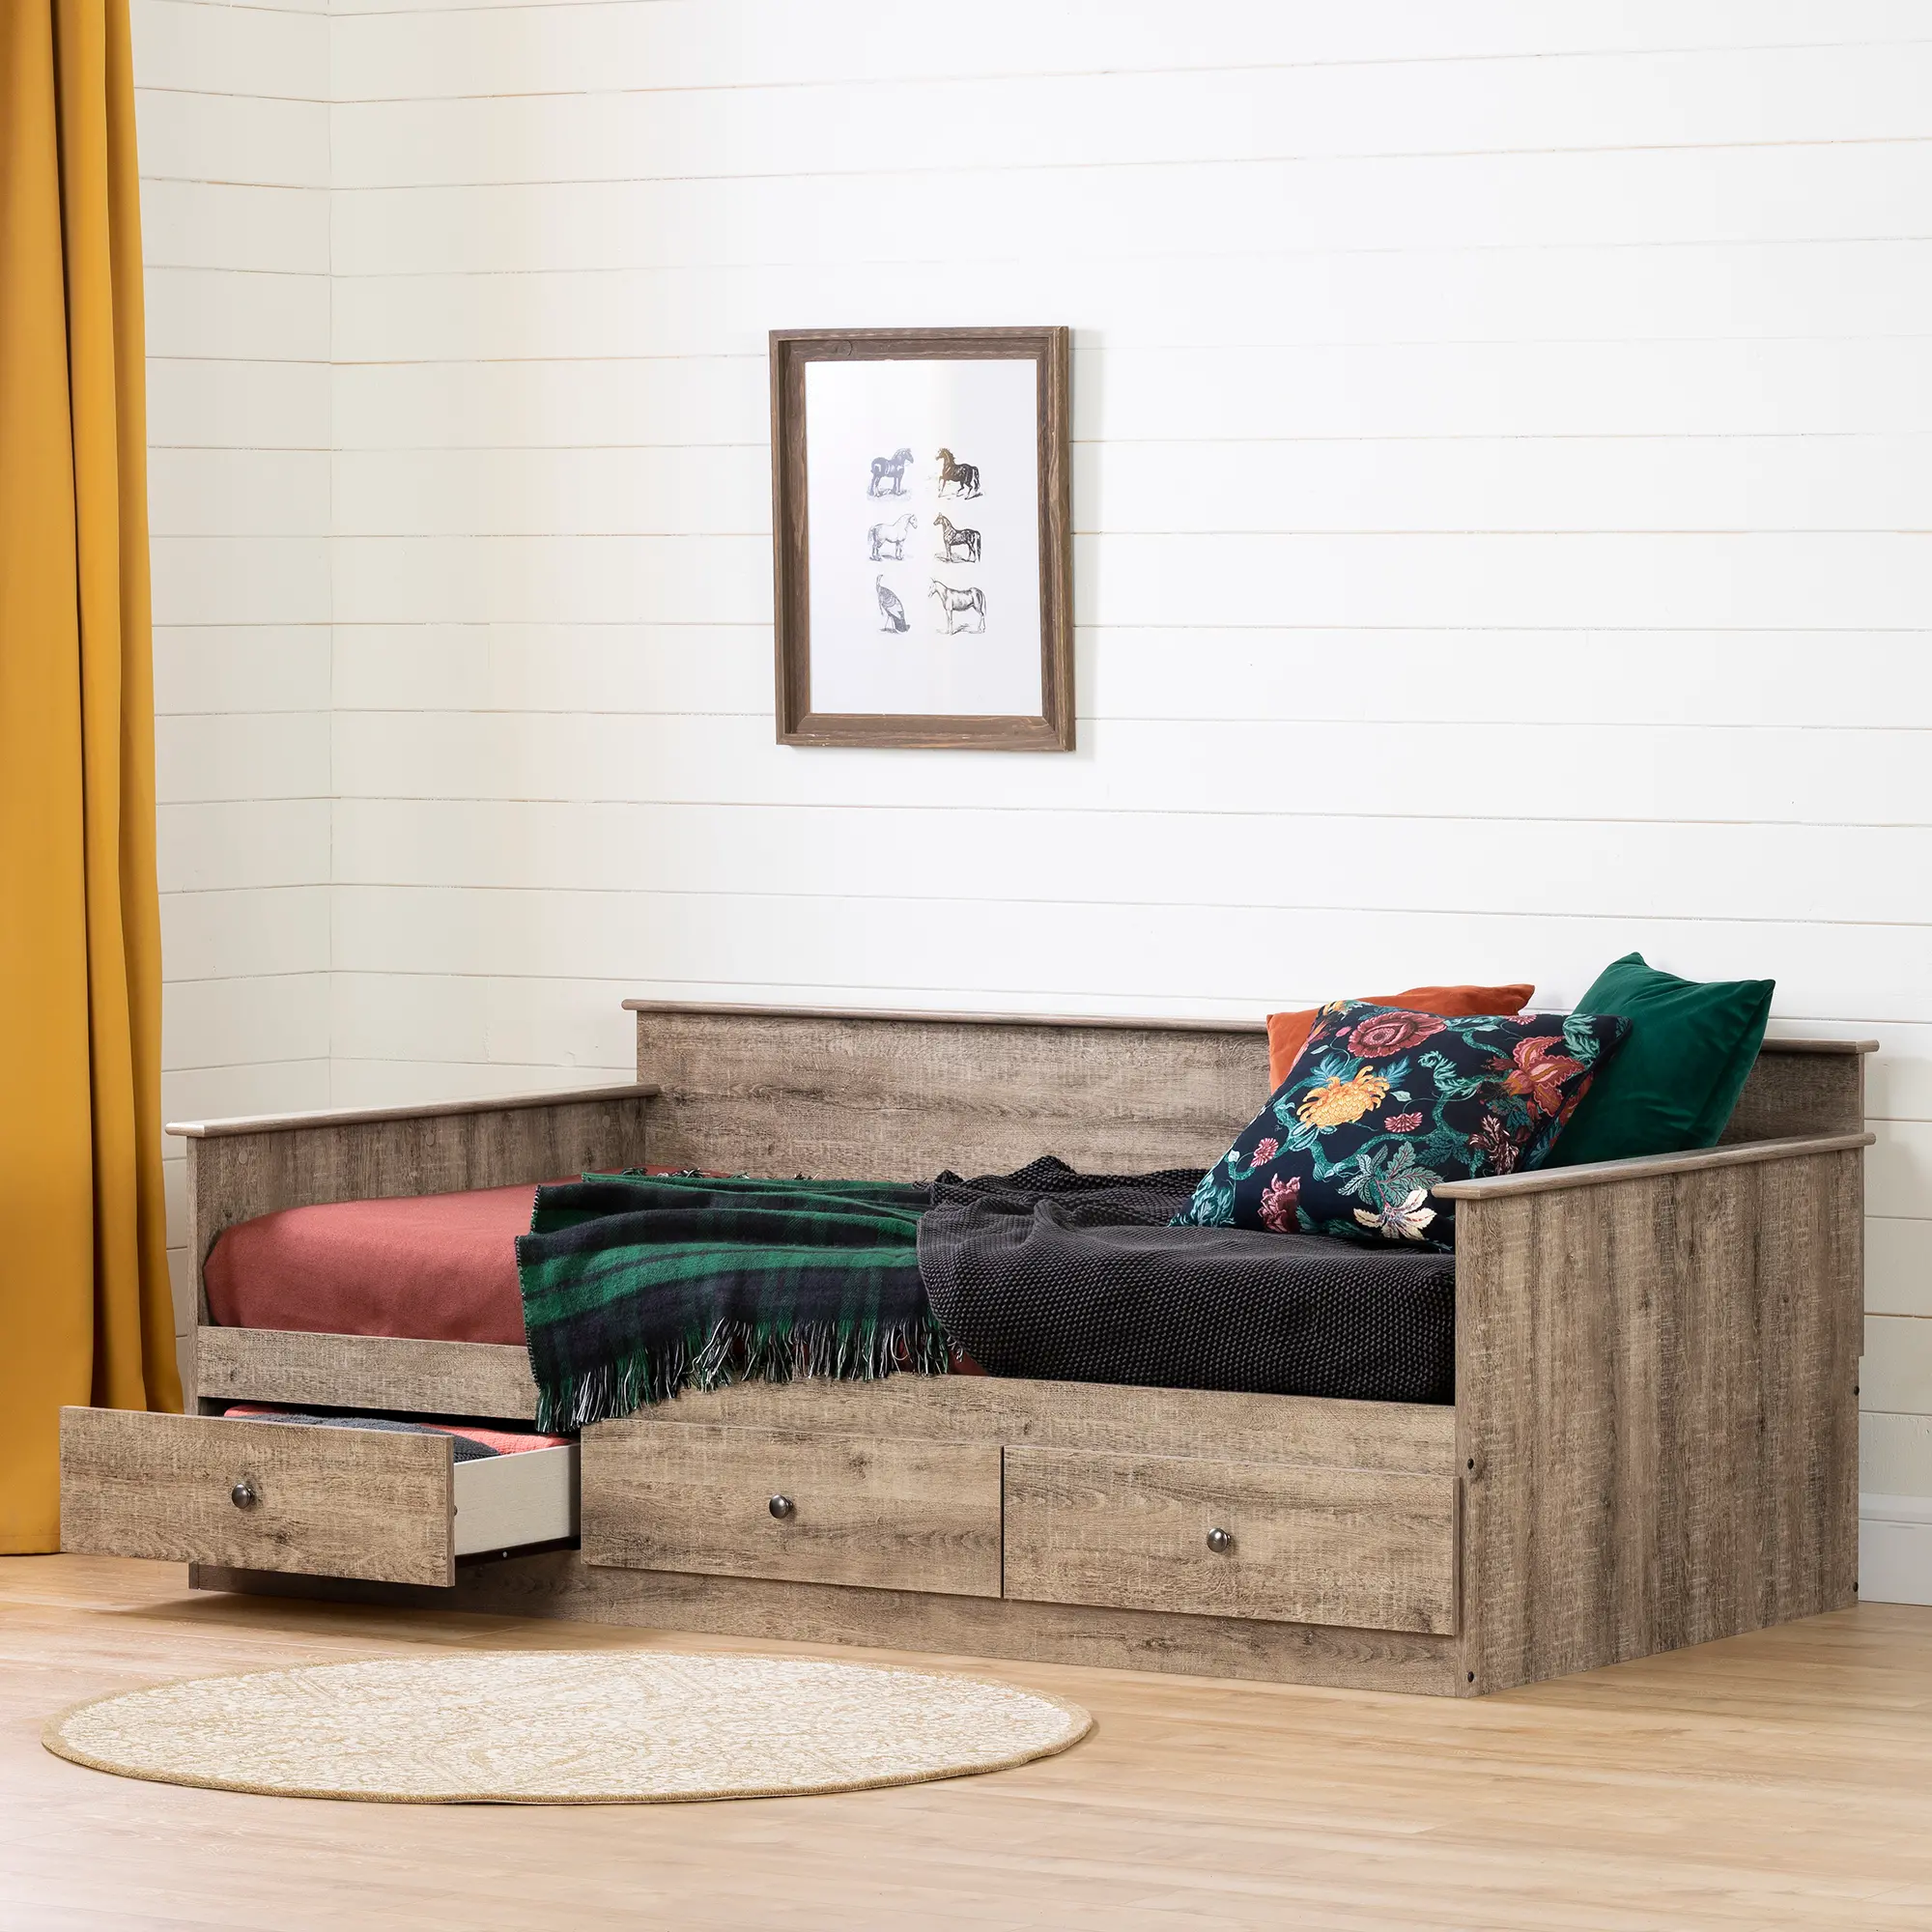 Tassio Farmhouse Weathered Oak Daybed - South Shore